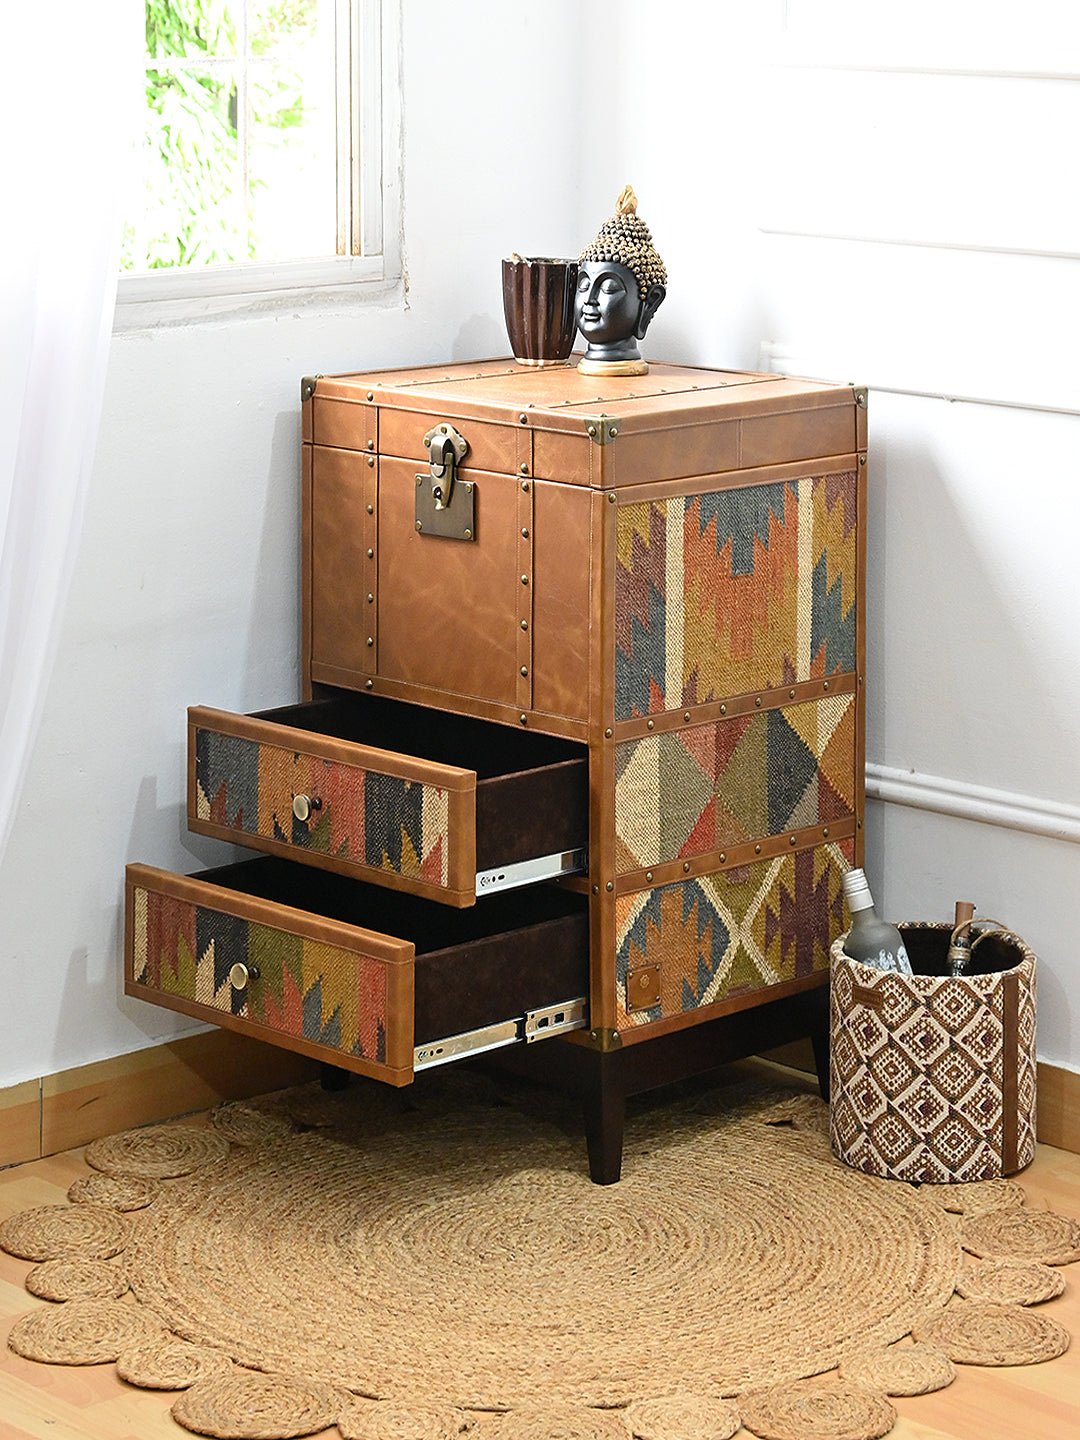 VAULTED DRAWER TRUNK - KILIM AND LEATHER - ART AVENUE